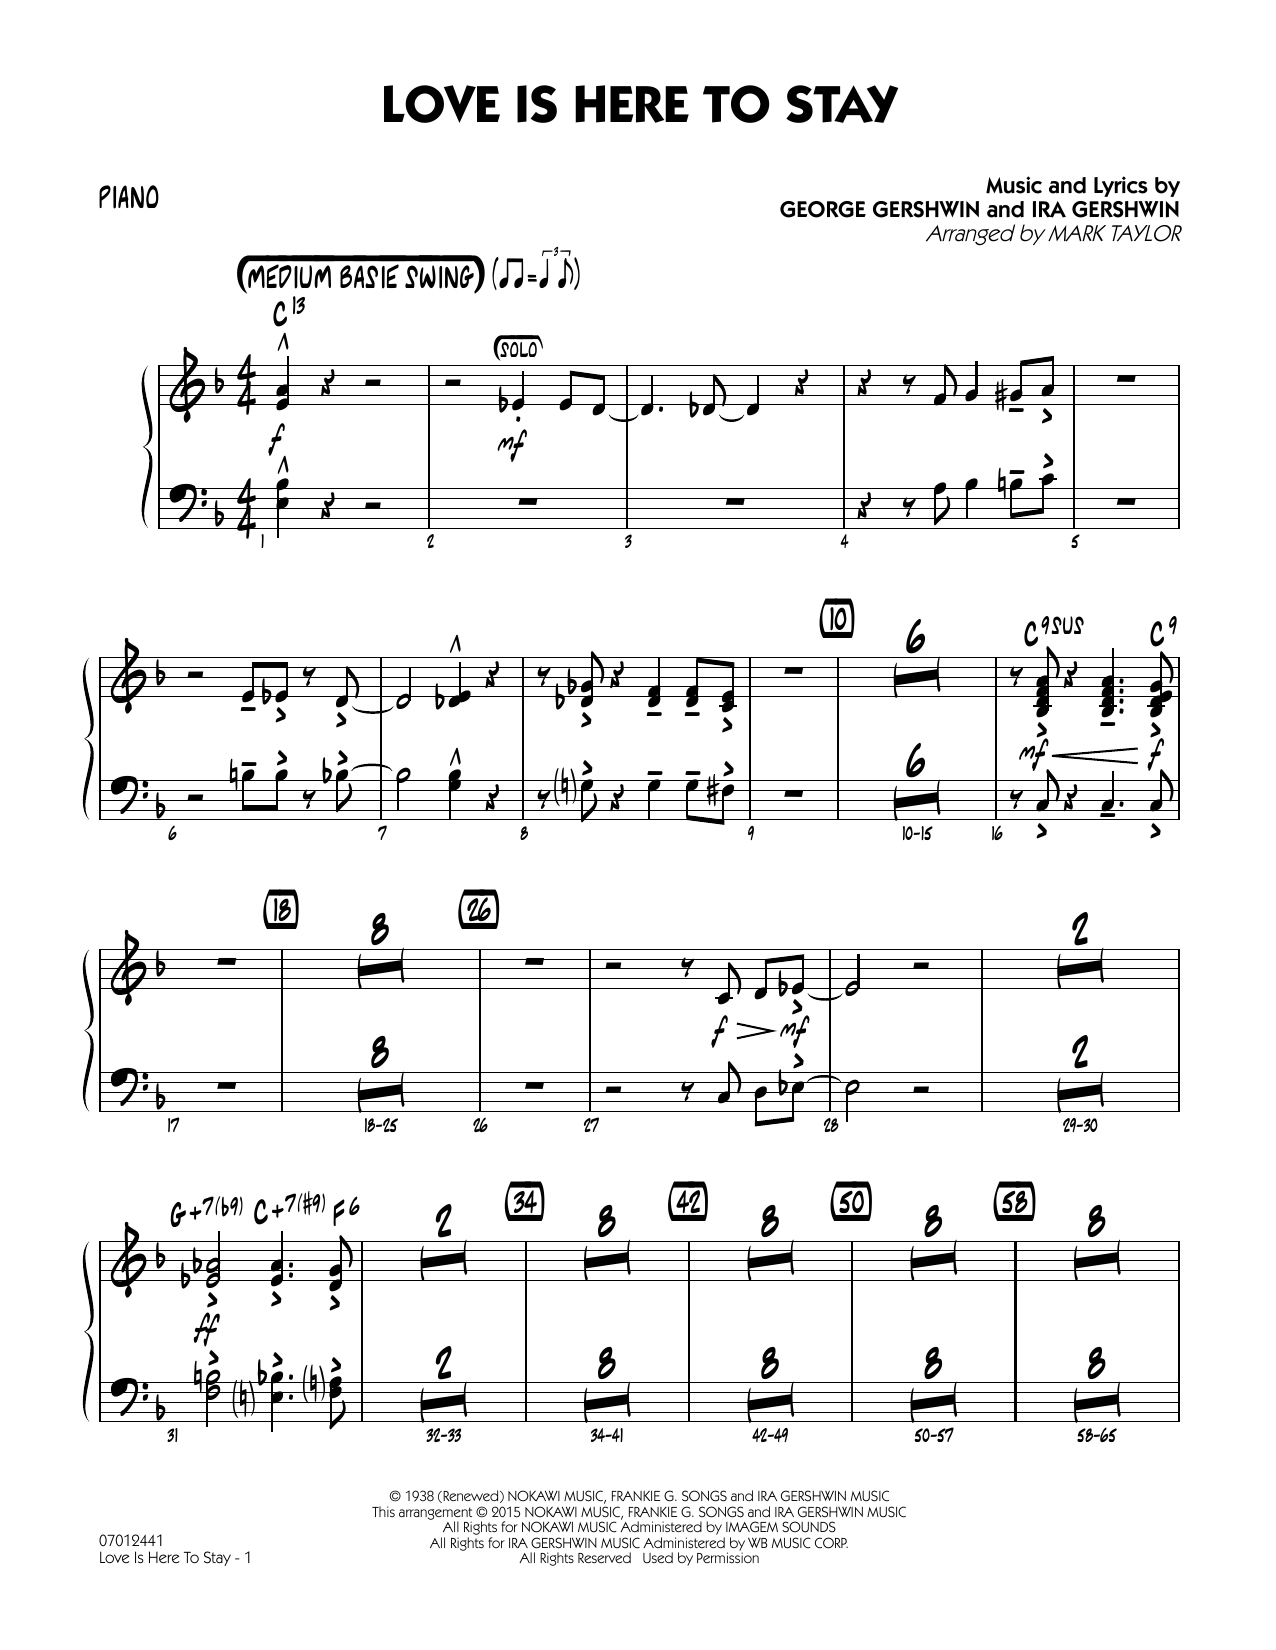 Mark Taylor Love Is Here to Stay - Piano sheet music notes and chords. Download Printable PDF.